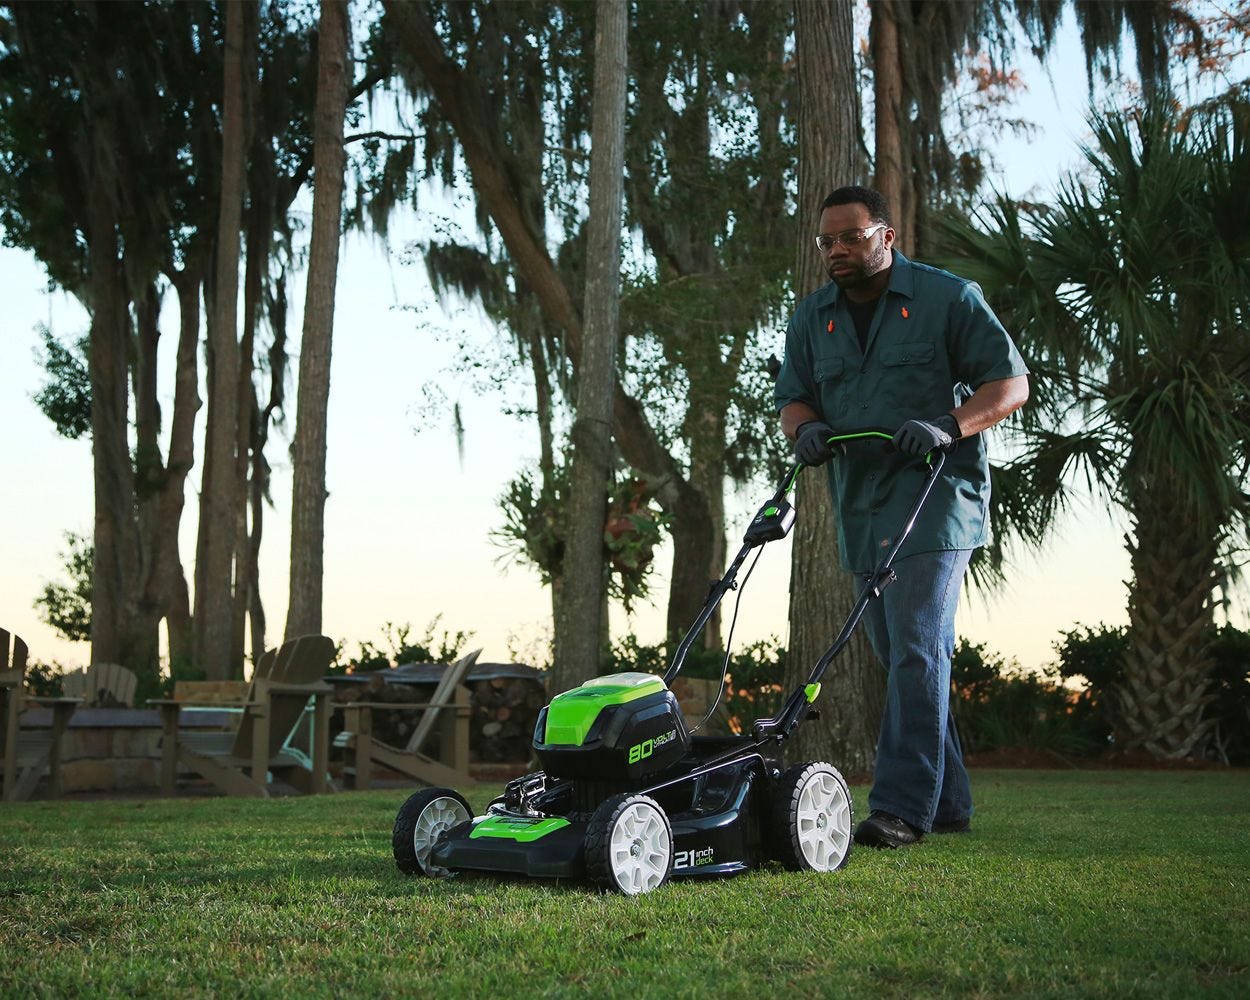 Pro 80V 21" Brushless Push Lawn Mower w/ (2) 2.0Ah Batteries & Rapid Charger